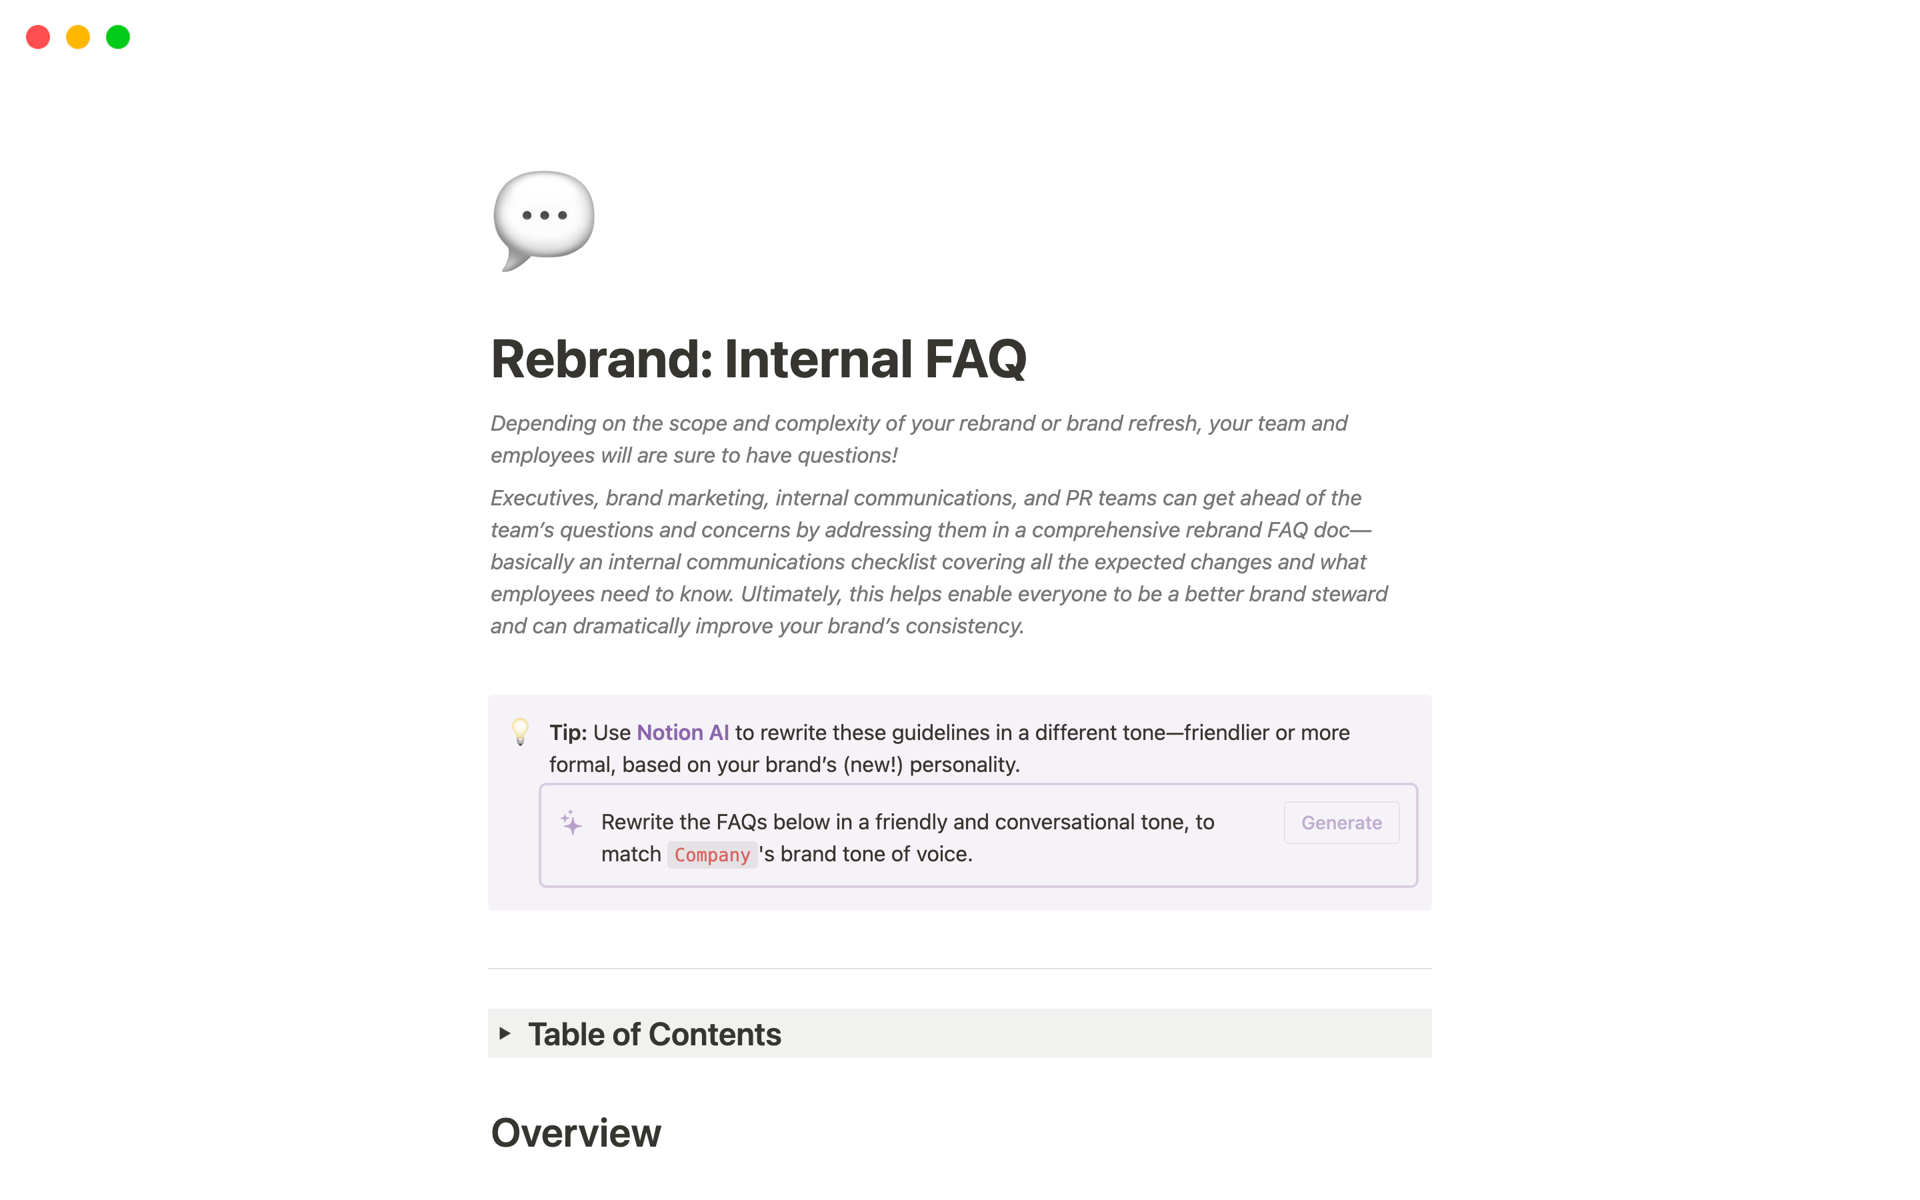 This guide is the ultimate internal FAQ and resource document for teams leading rebrands. 